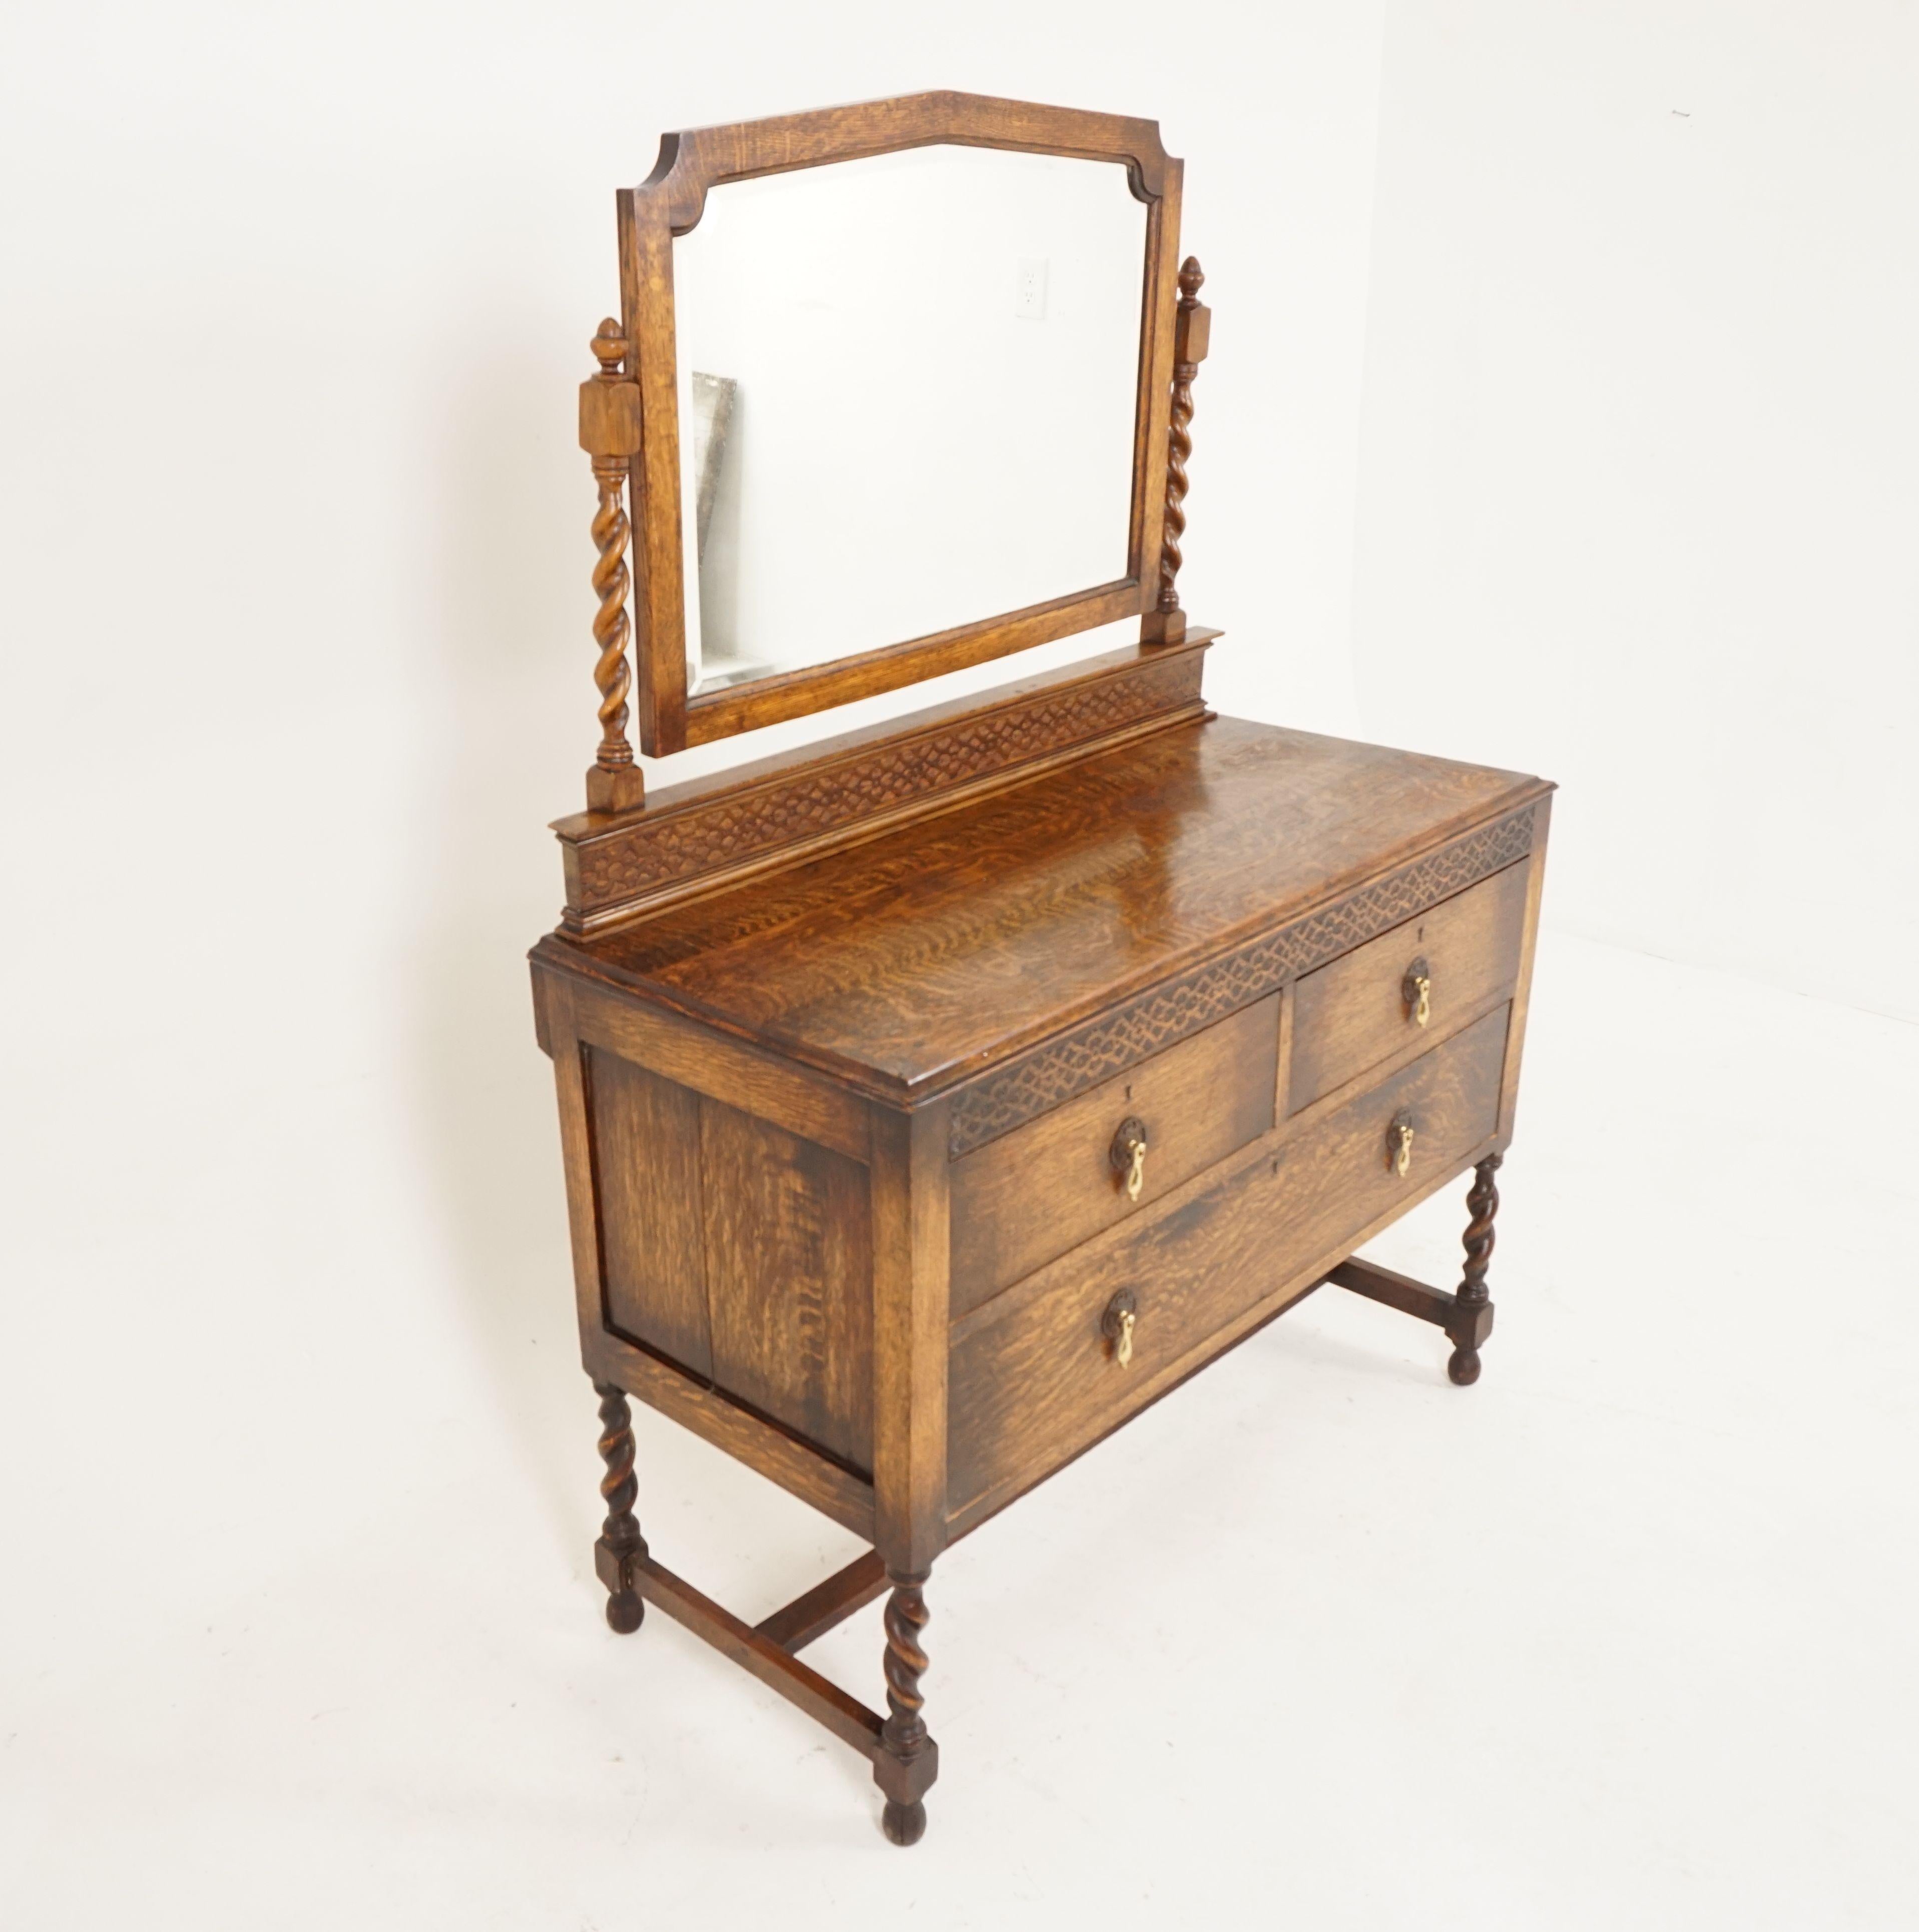 Antique Vanity, tiger oak, Barley twist, with mirror, Scotland 1920, B2530

Scotland 1920
Solid oak
Original finish
Shaped beveled mirror (with some crazing)
Pair of barley twist supports with finials to the top
Carved back
Rectangular